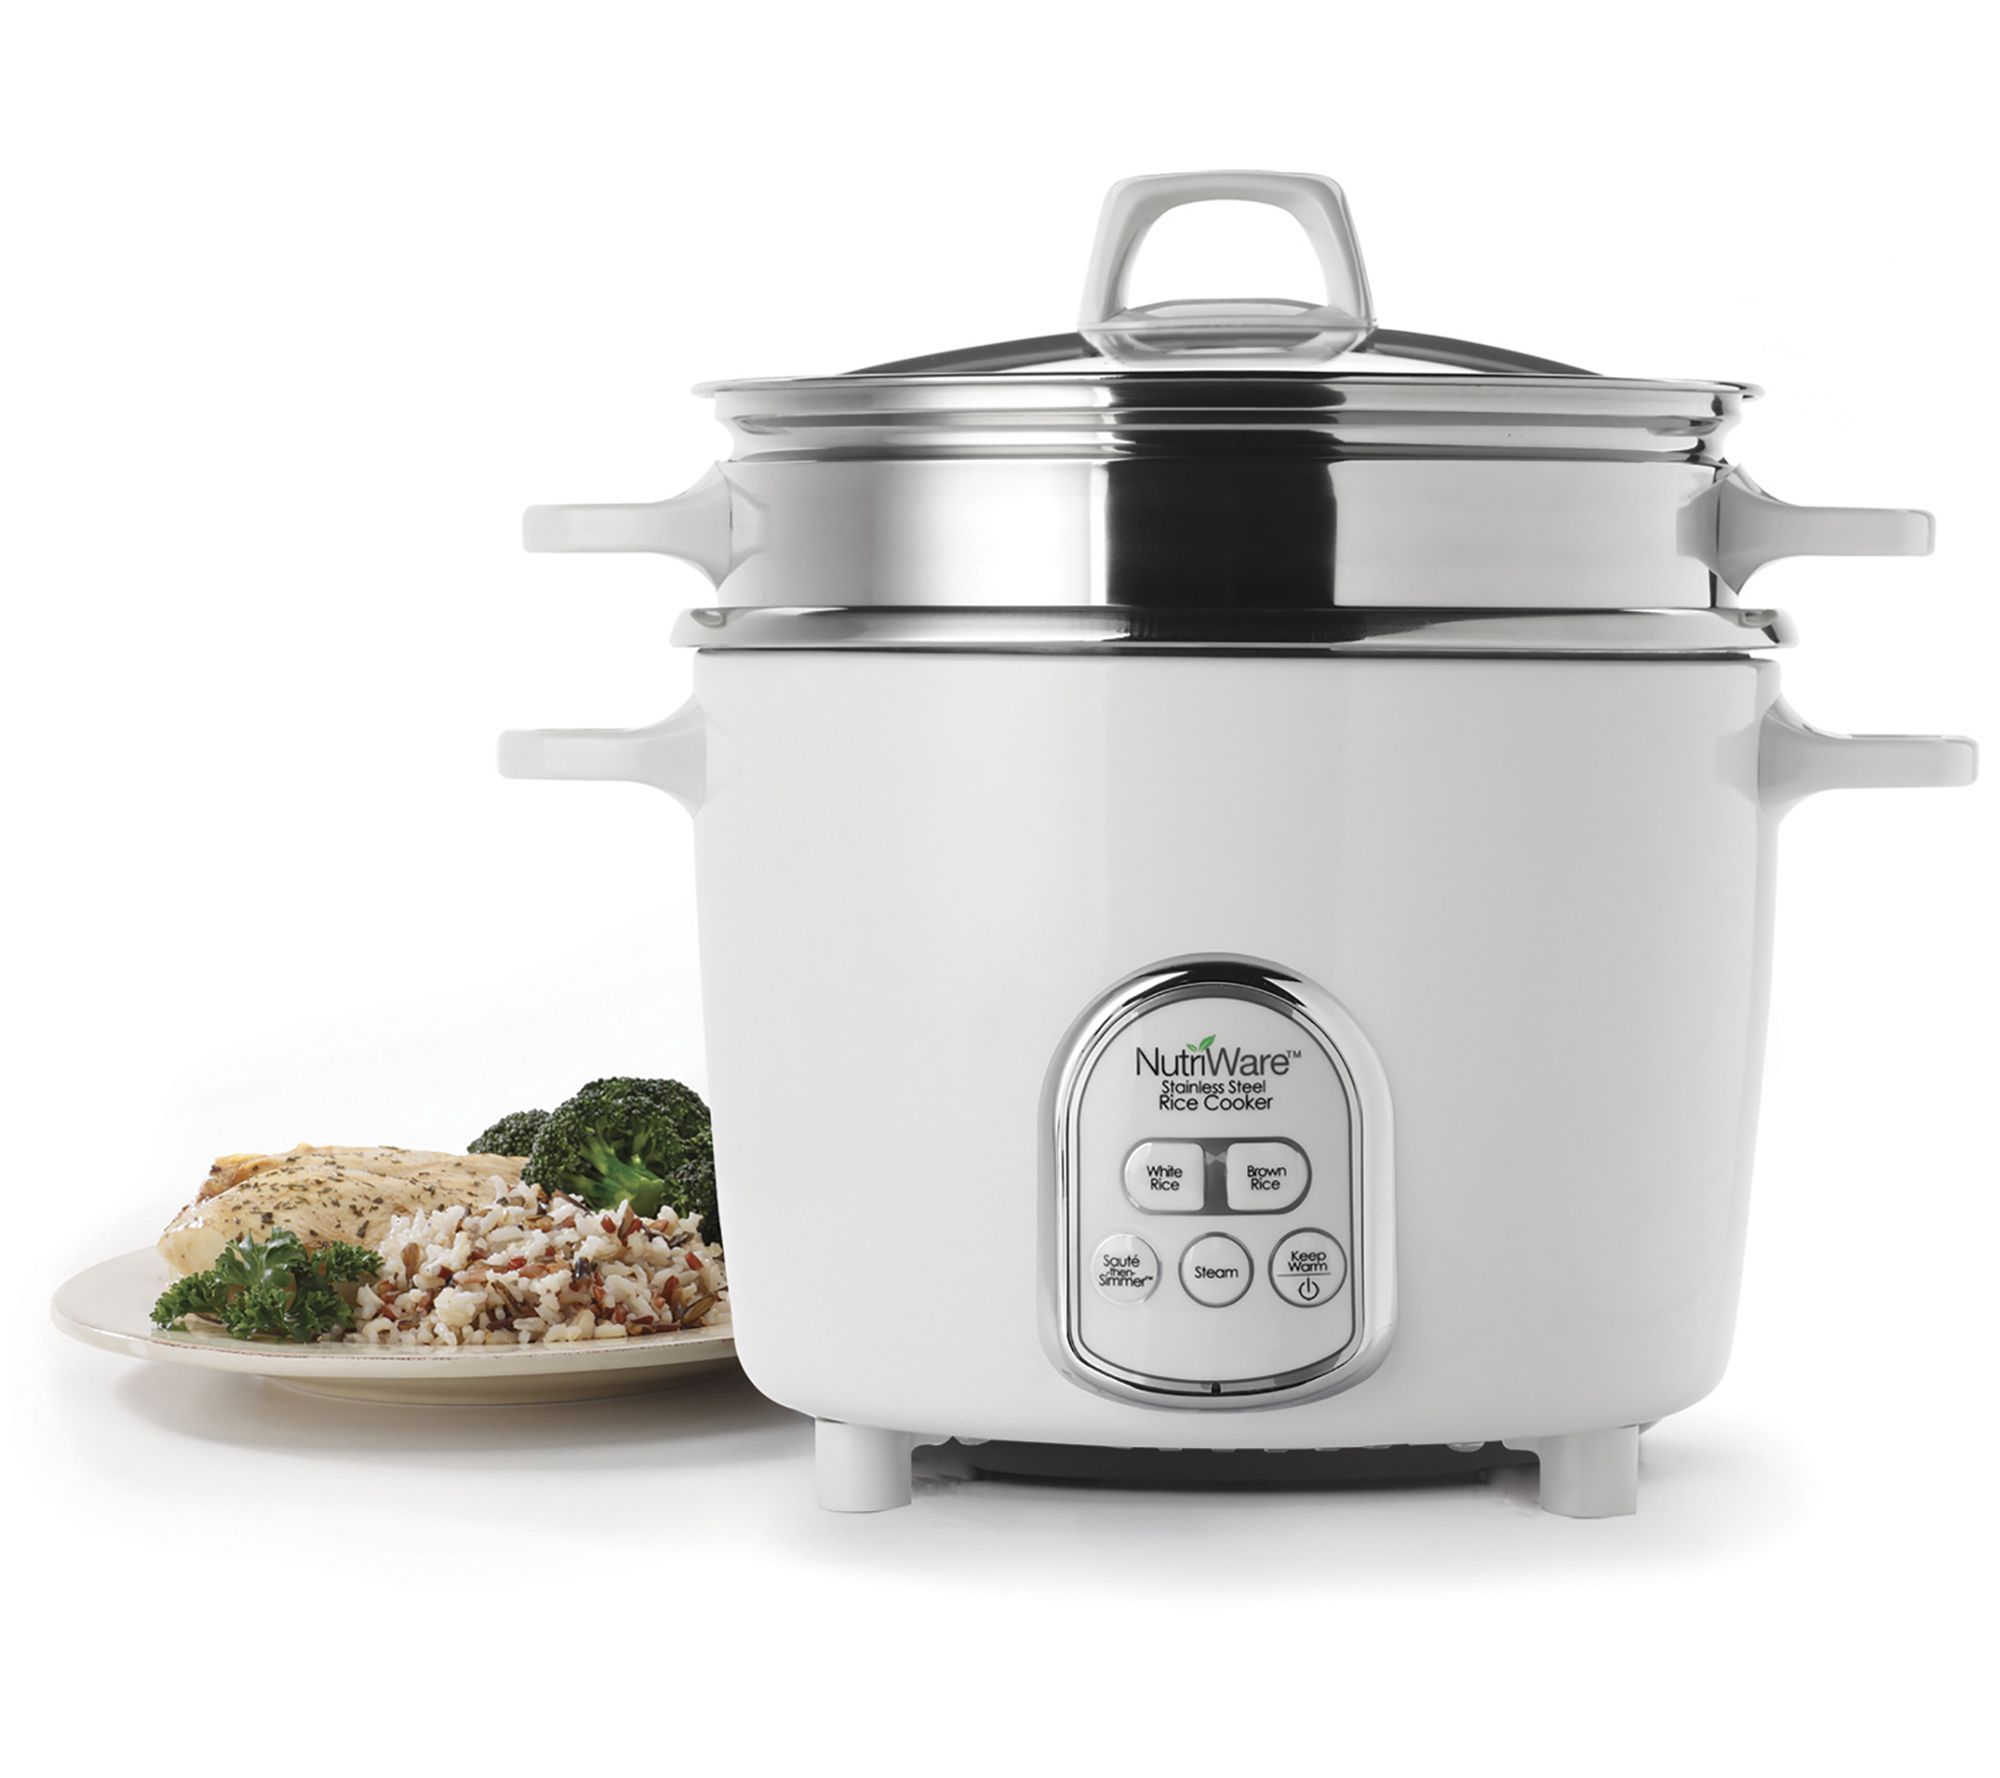 Aroma NutriWare Rice Cooker & Food Steamer - QVC.com